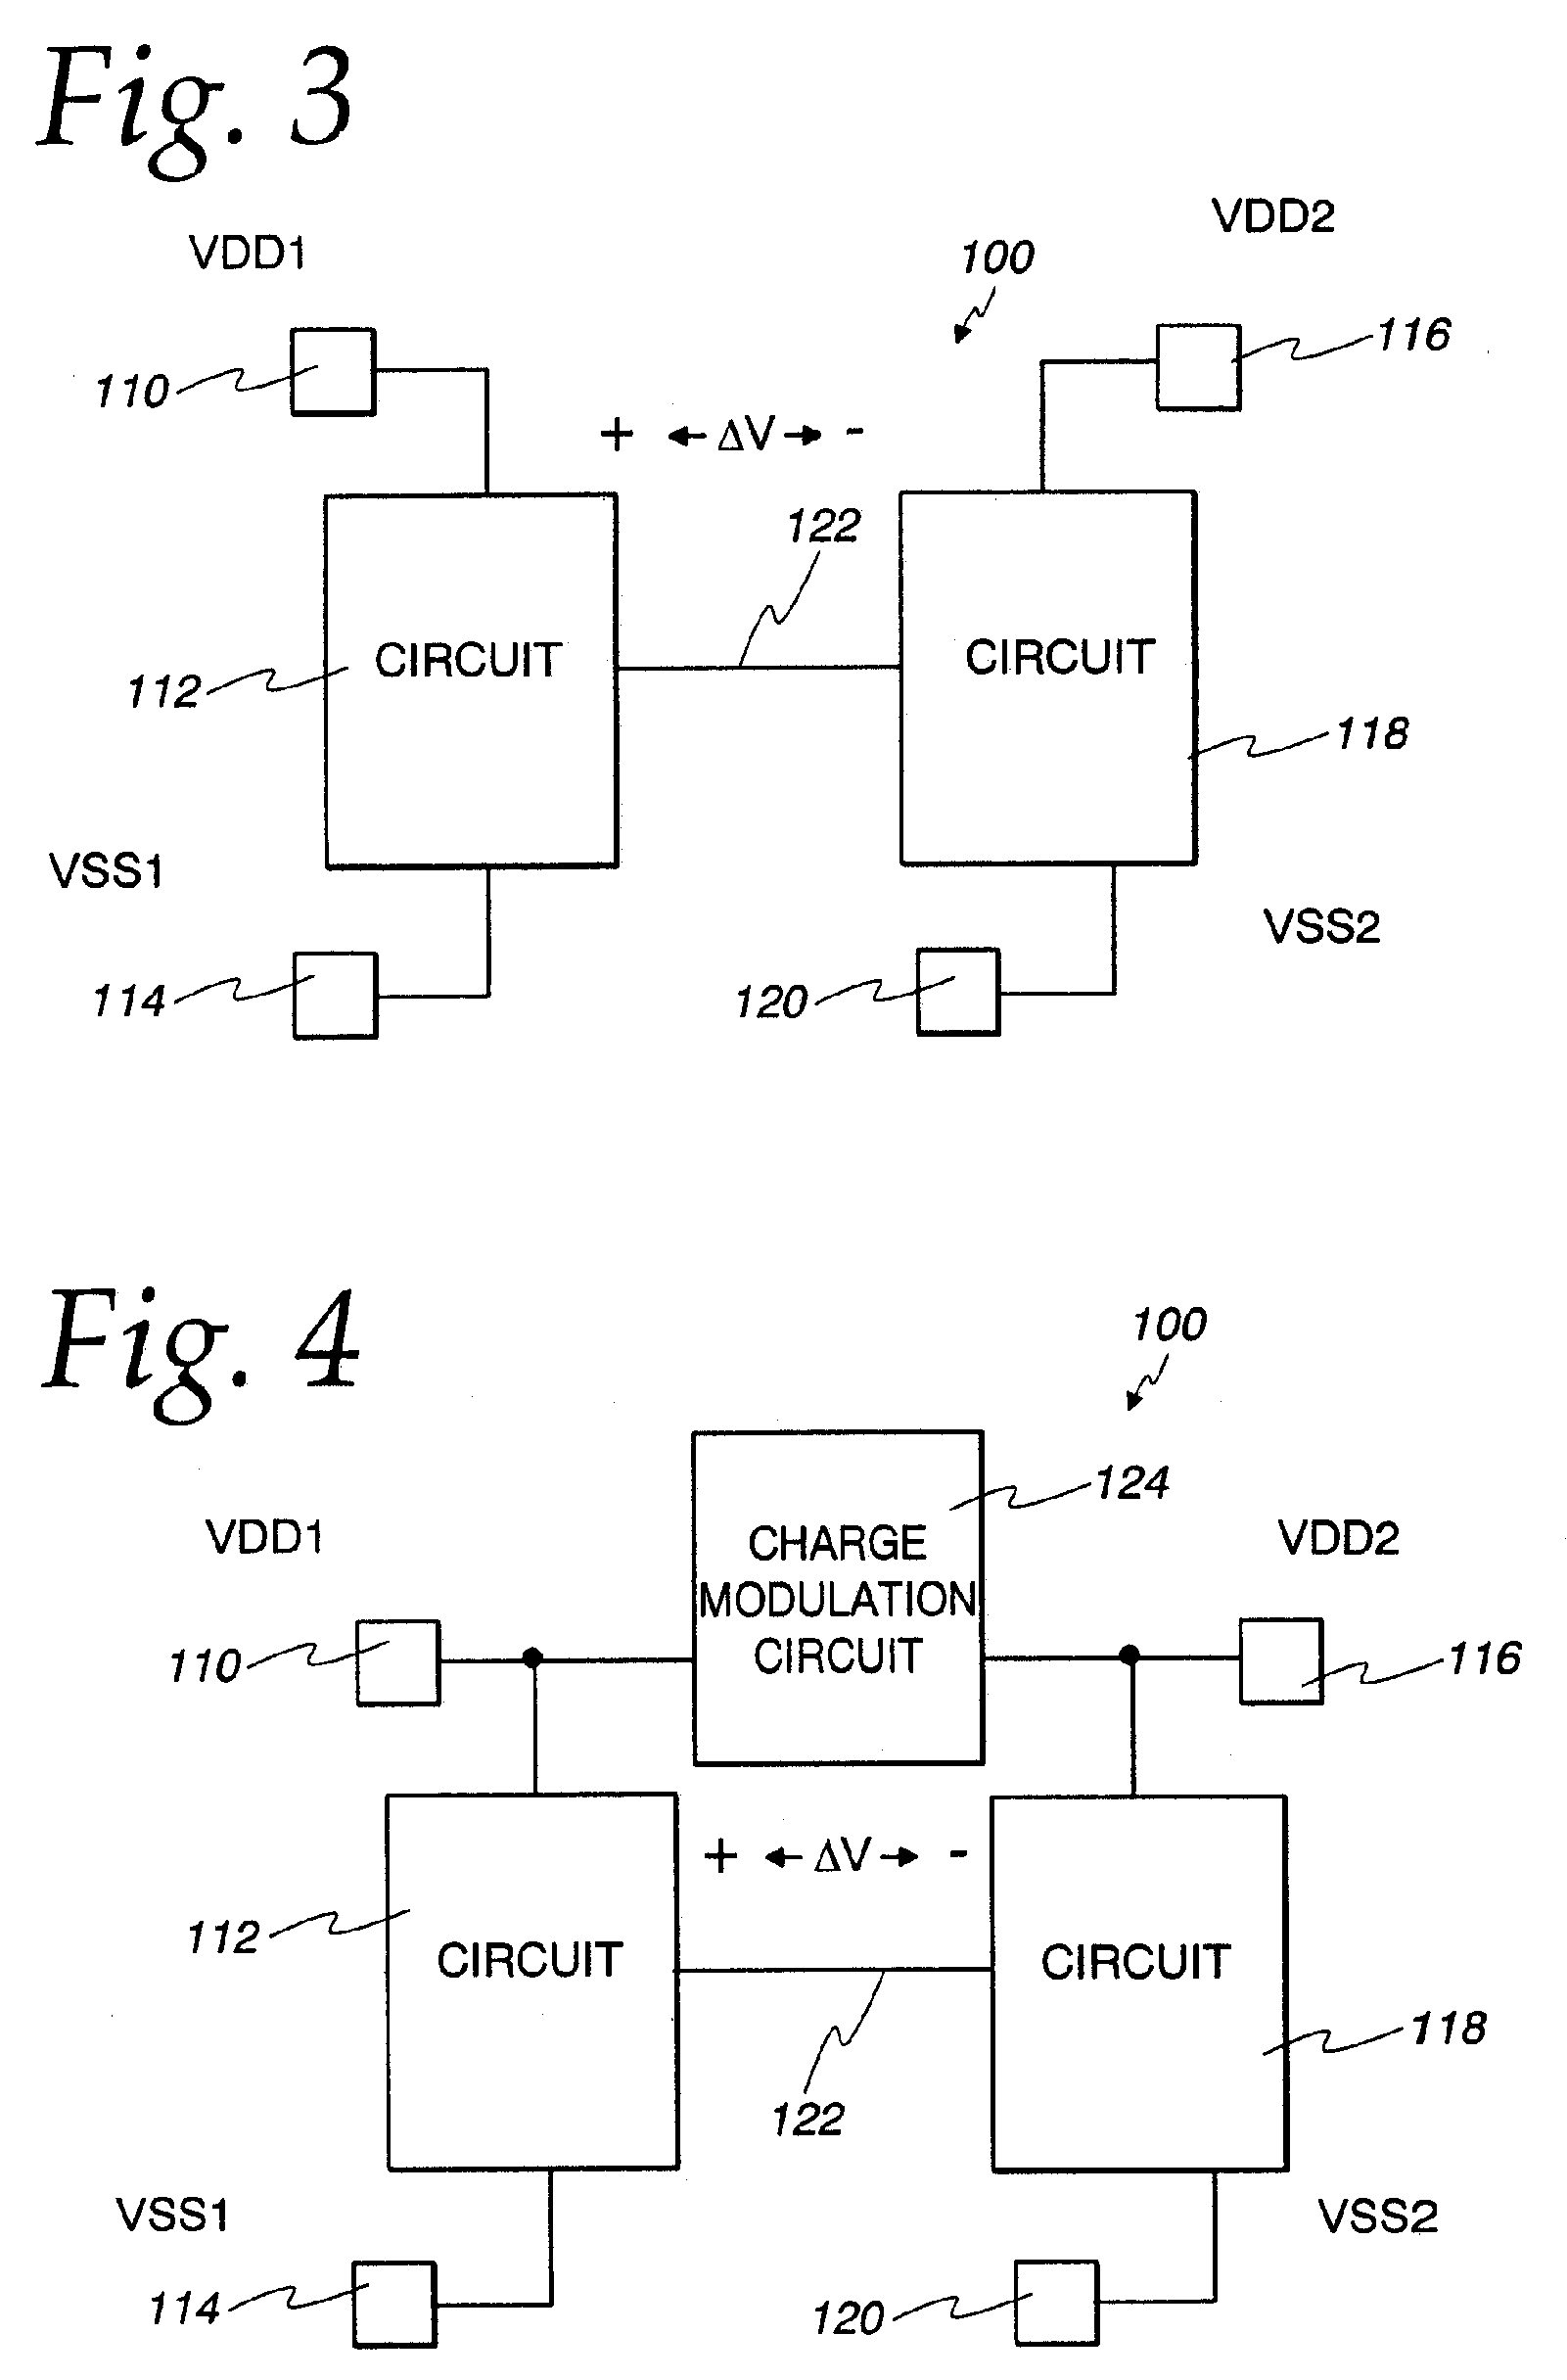 Charge modulation network for multiple power domains for silicon-on-insulator technology